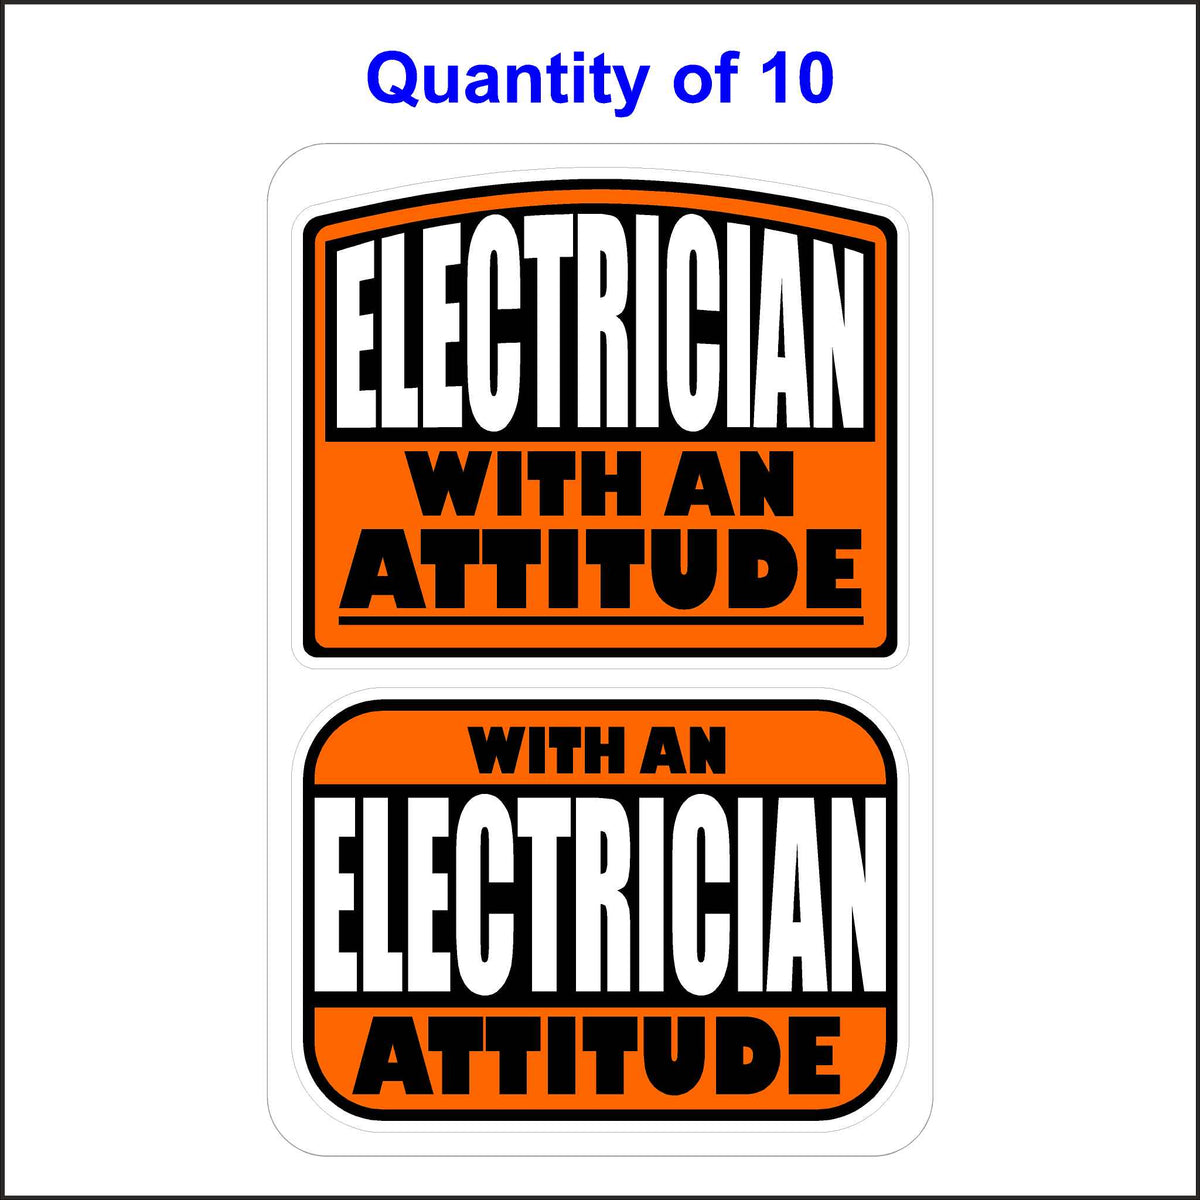 Electrician With An Attitude Stickers 10 Quantity.